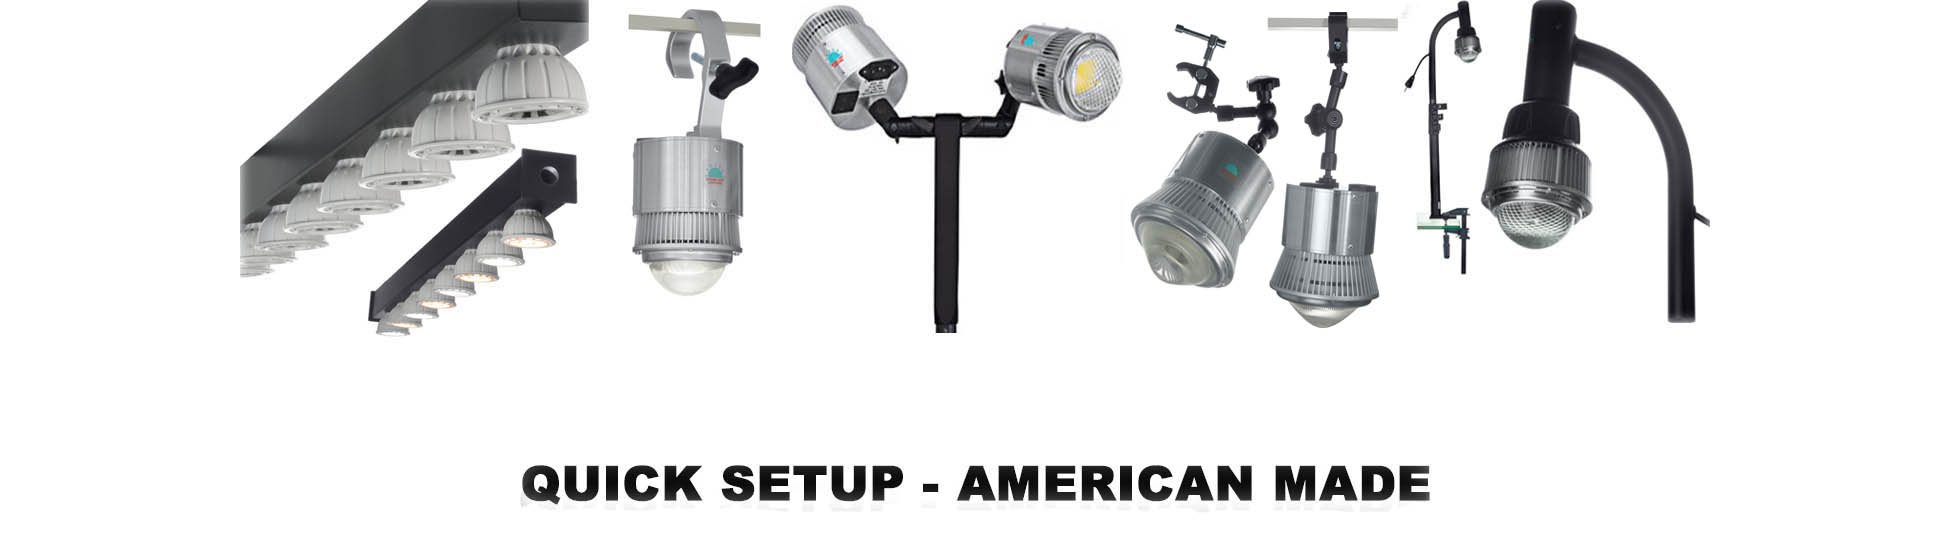 trade show light fixtures by Show Off Lighting